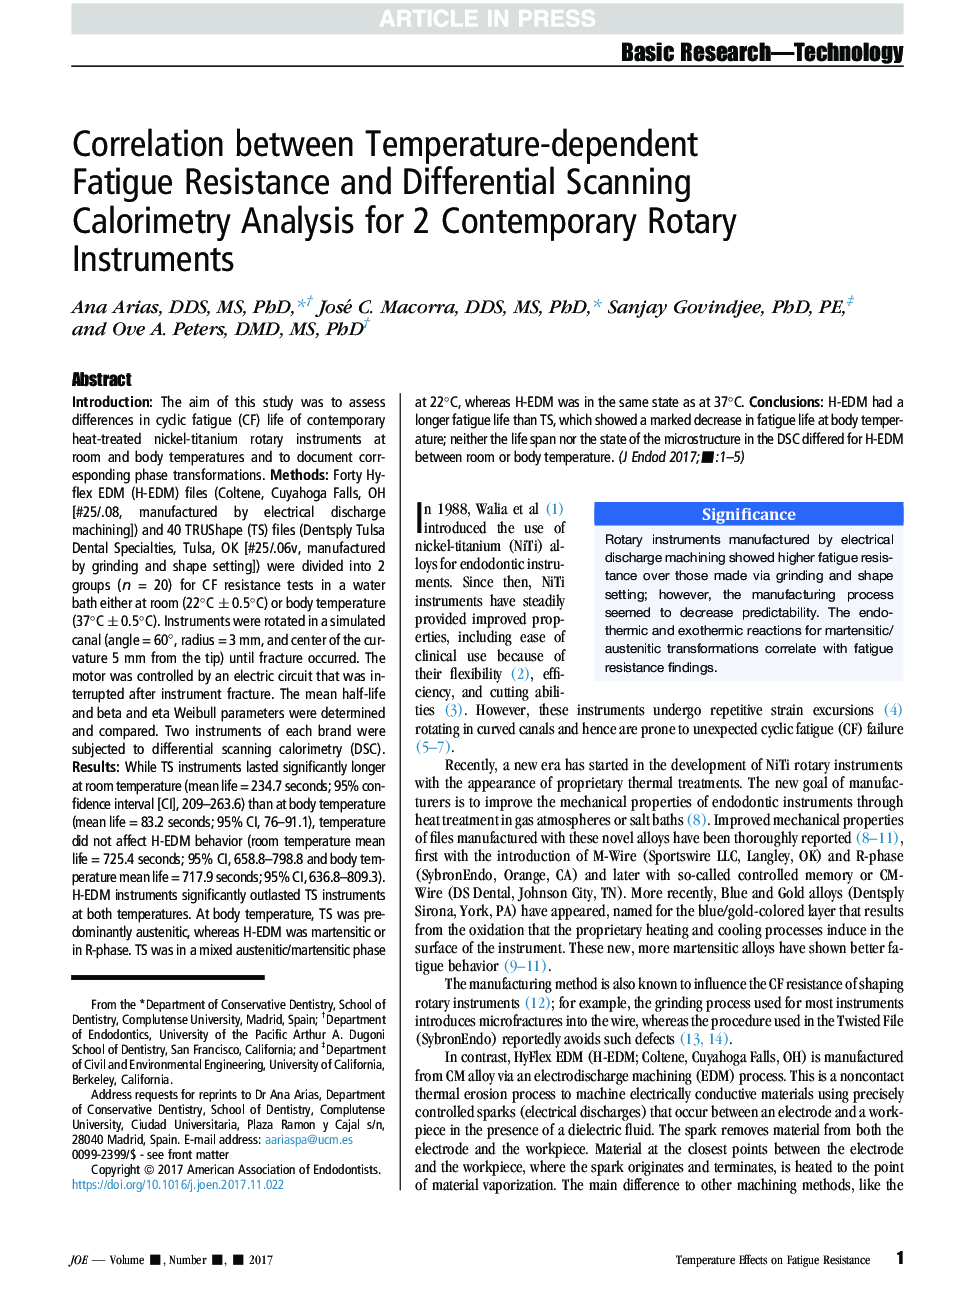 Correlation between Temperature-dependent Fatigue Resistance and Differential Scanning Calorimetry Analysis for 2 Contemporary Rotary Instruments